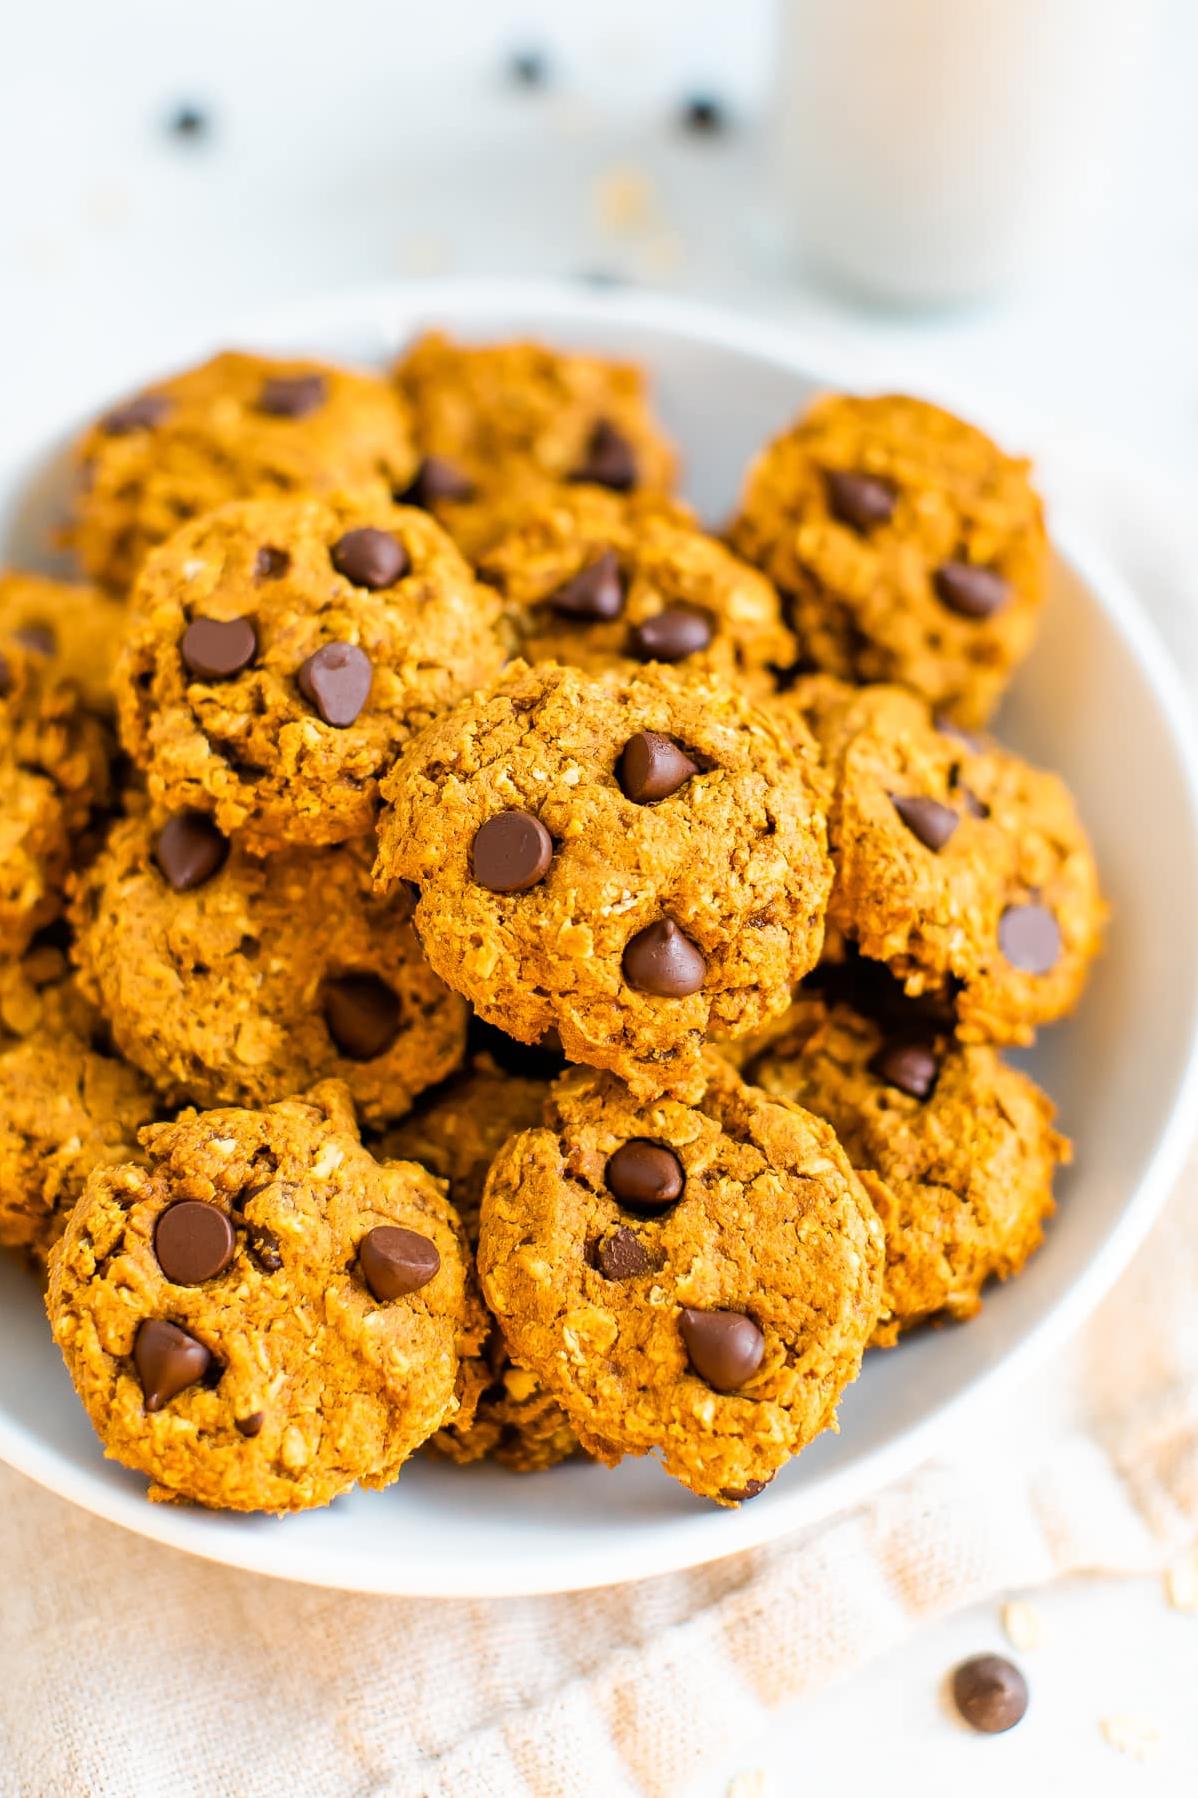  These pumpkin oatmeal cookies will make your taste buds dance with joy.